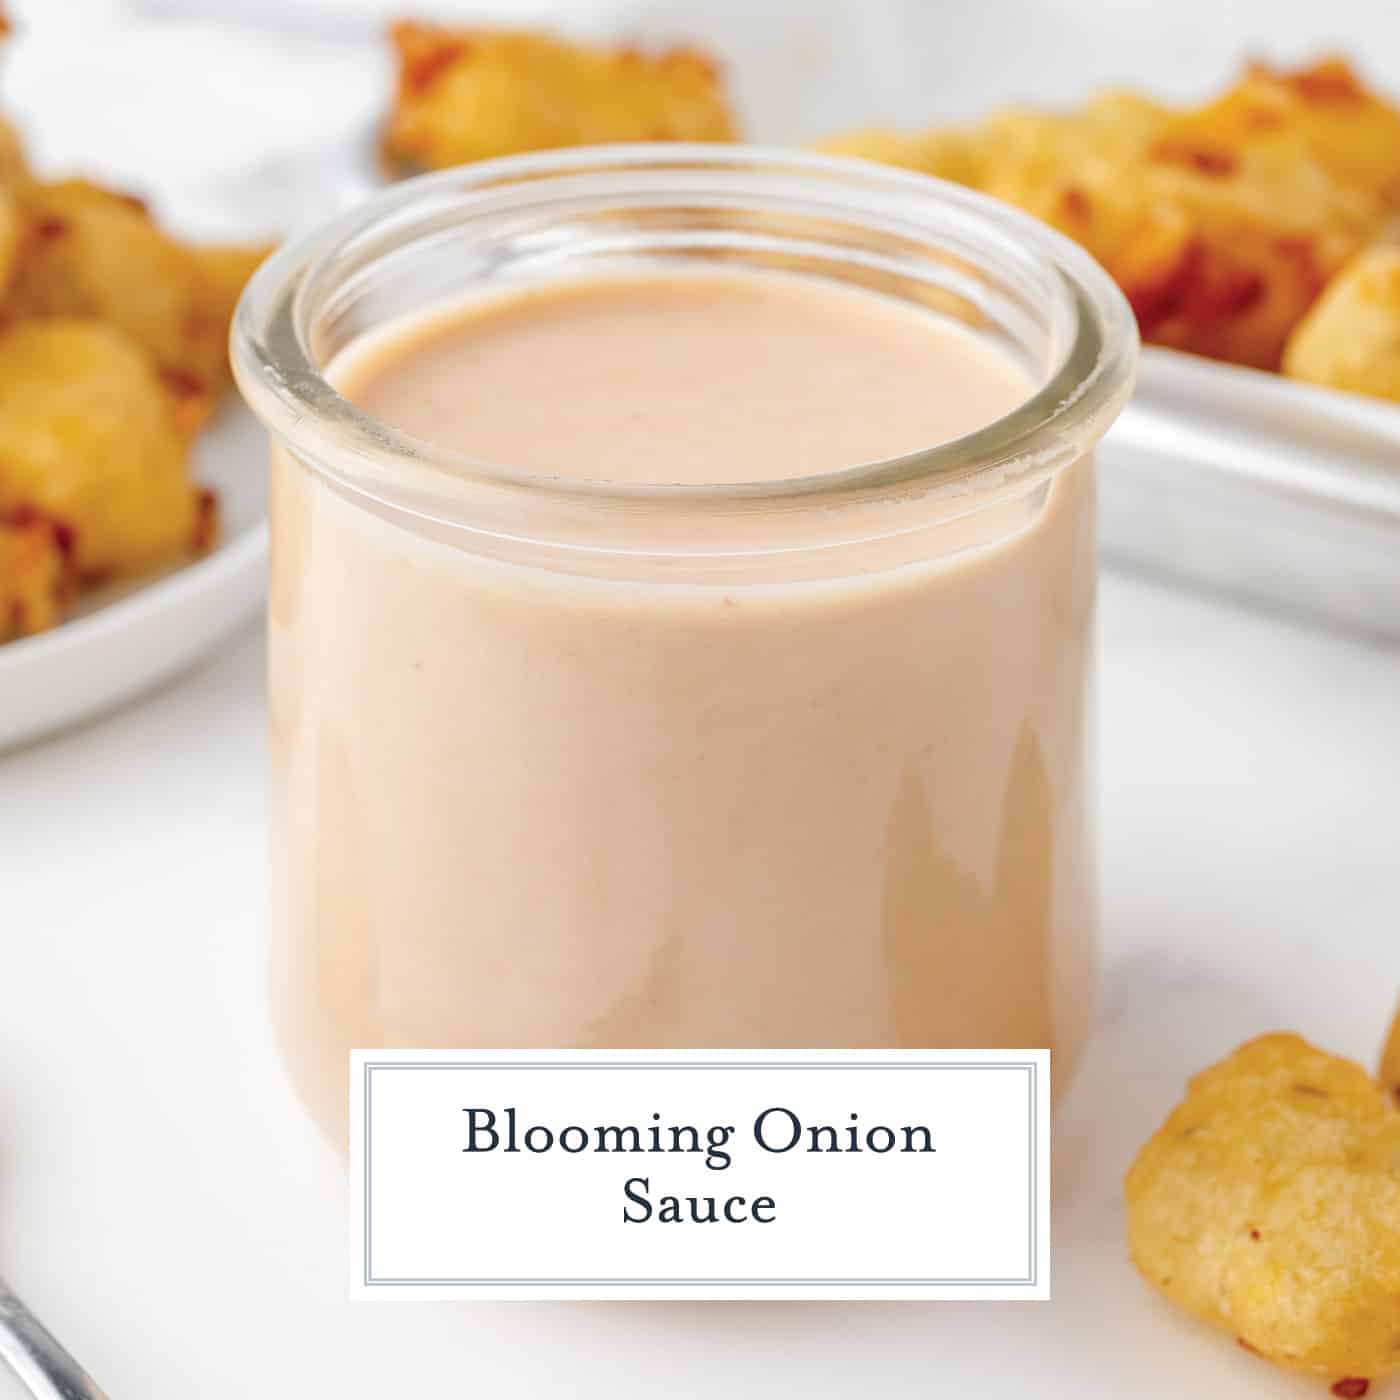 angled shot of jar of bloomin onion sauce with text overlay for facebook